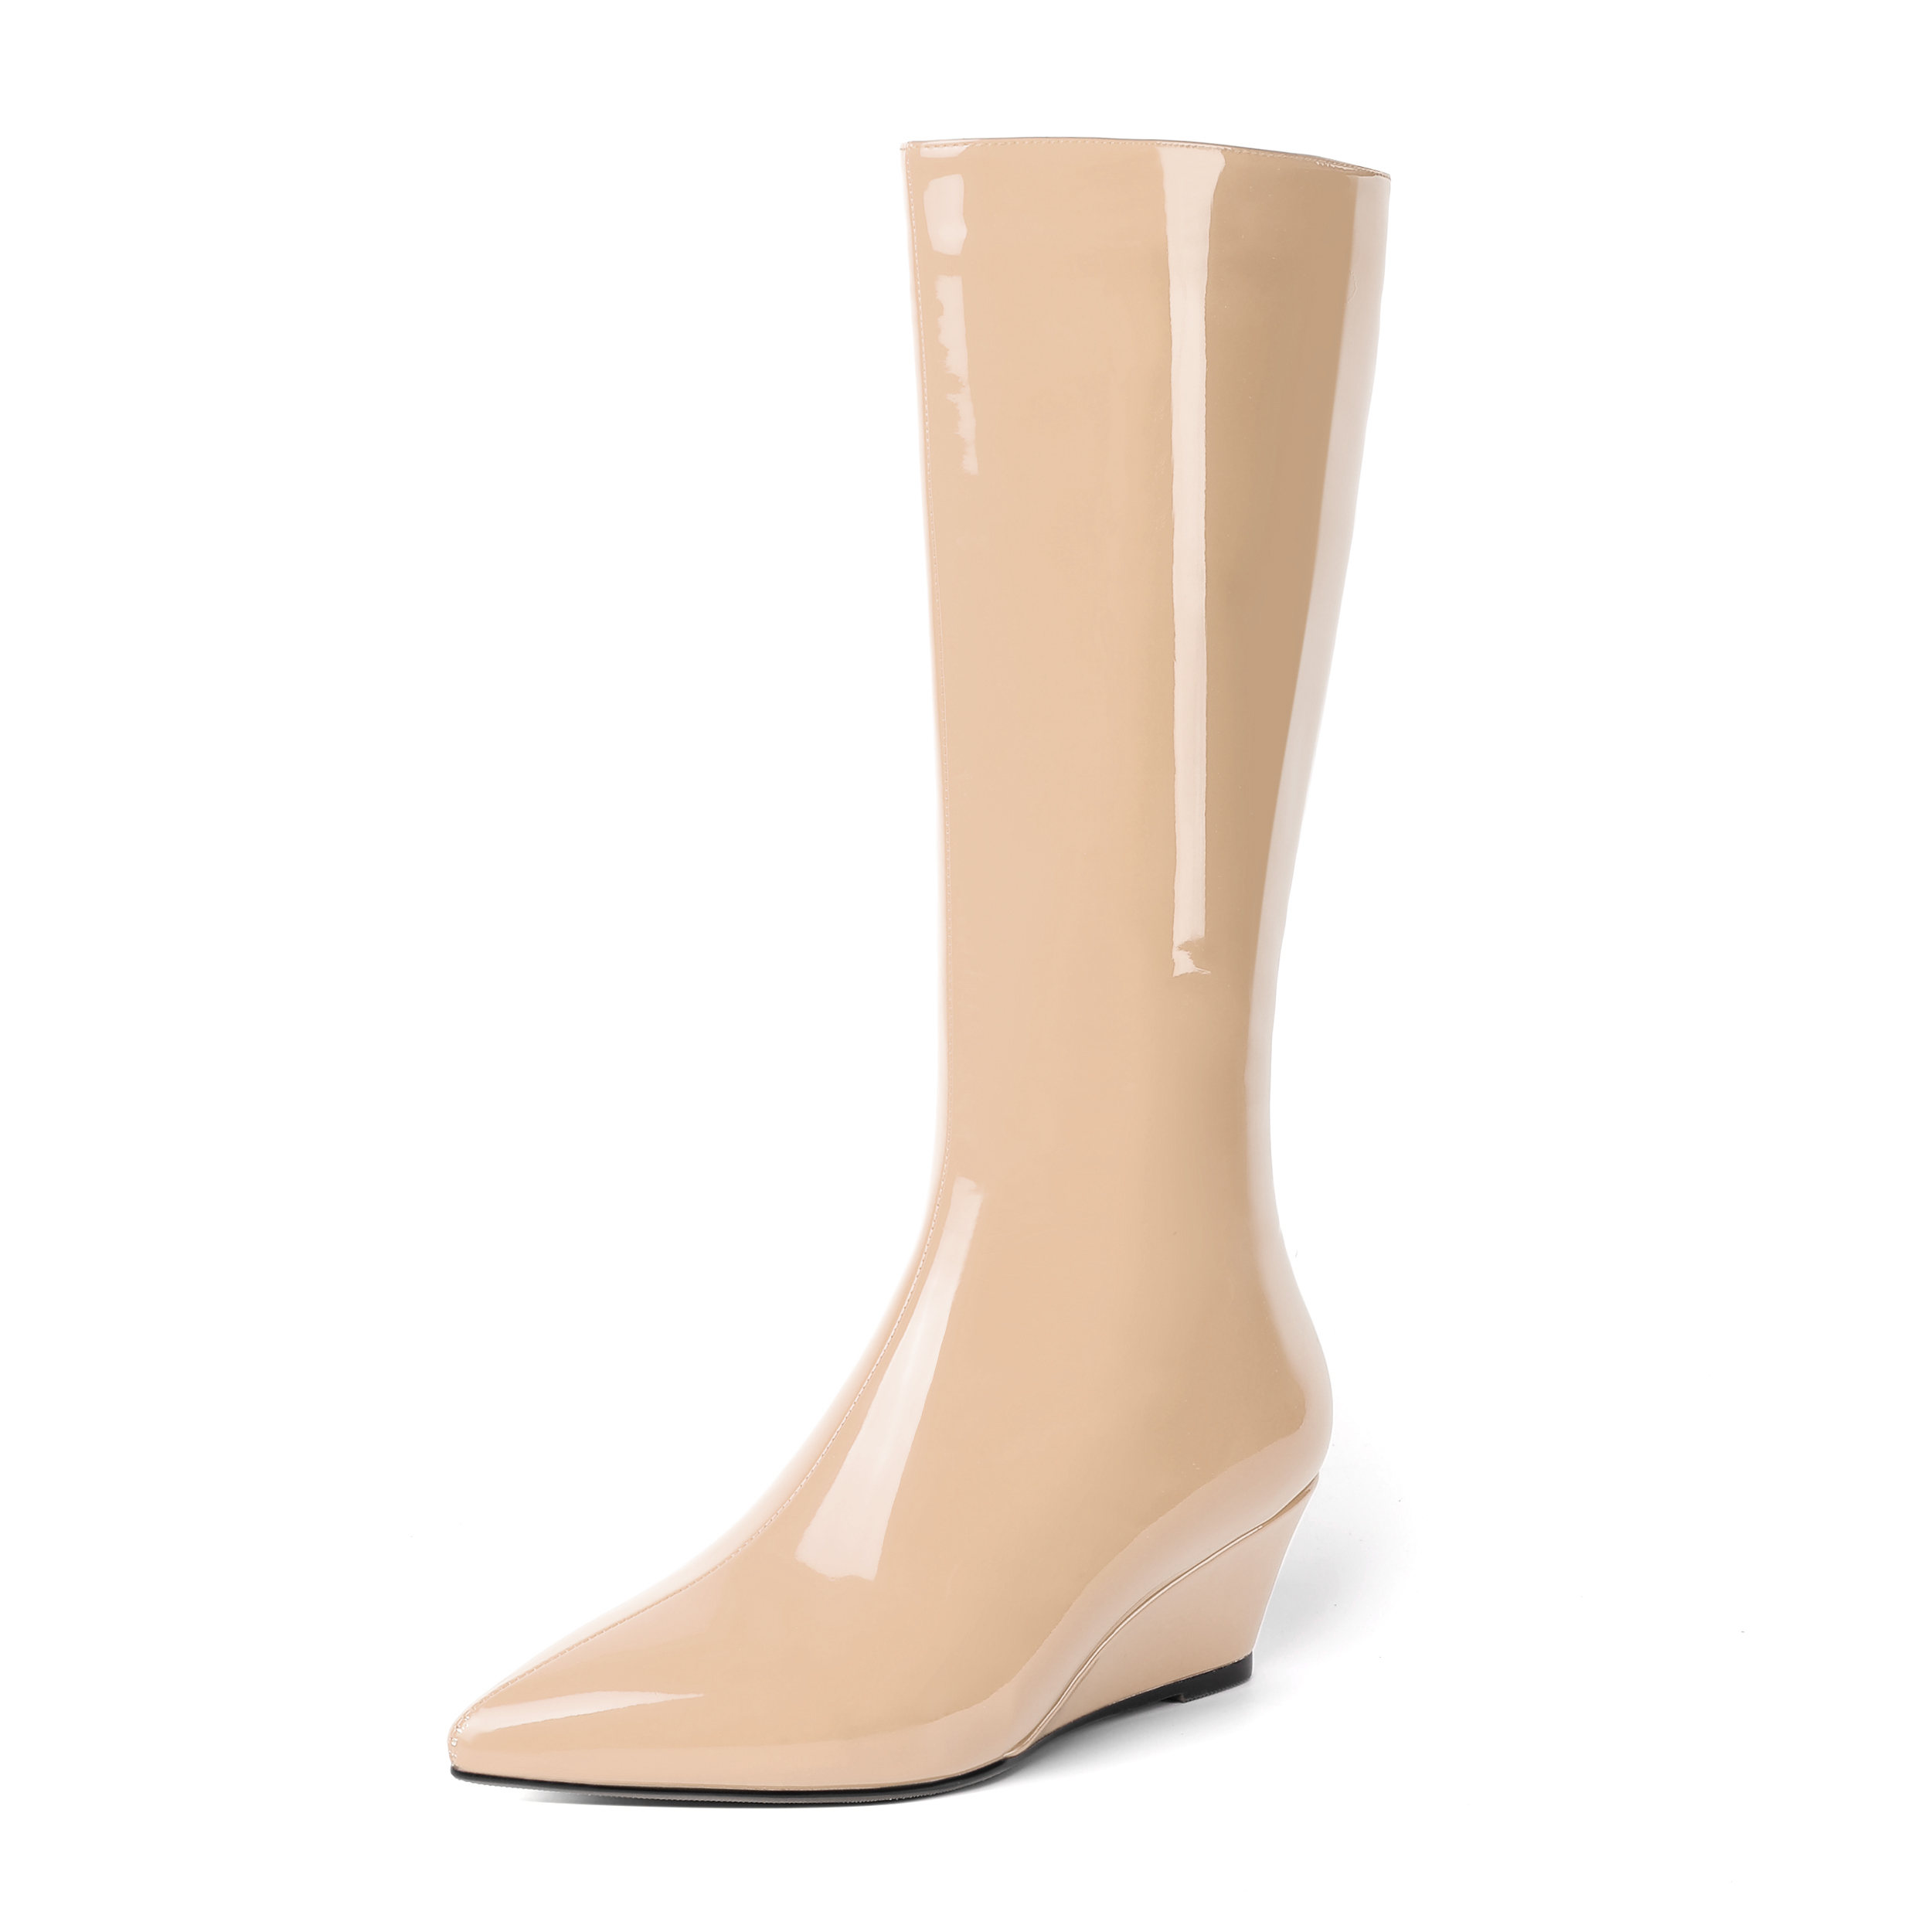 Magnolia Pointed Toe Patent Zip Boots